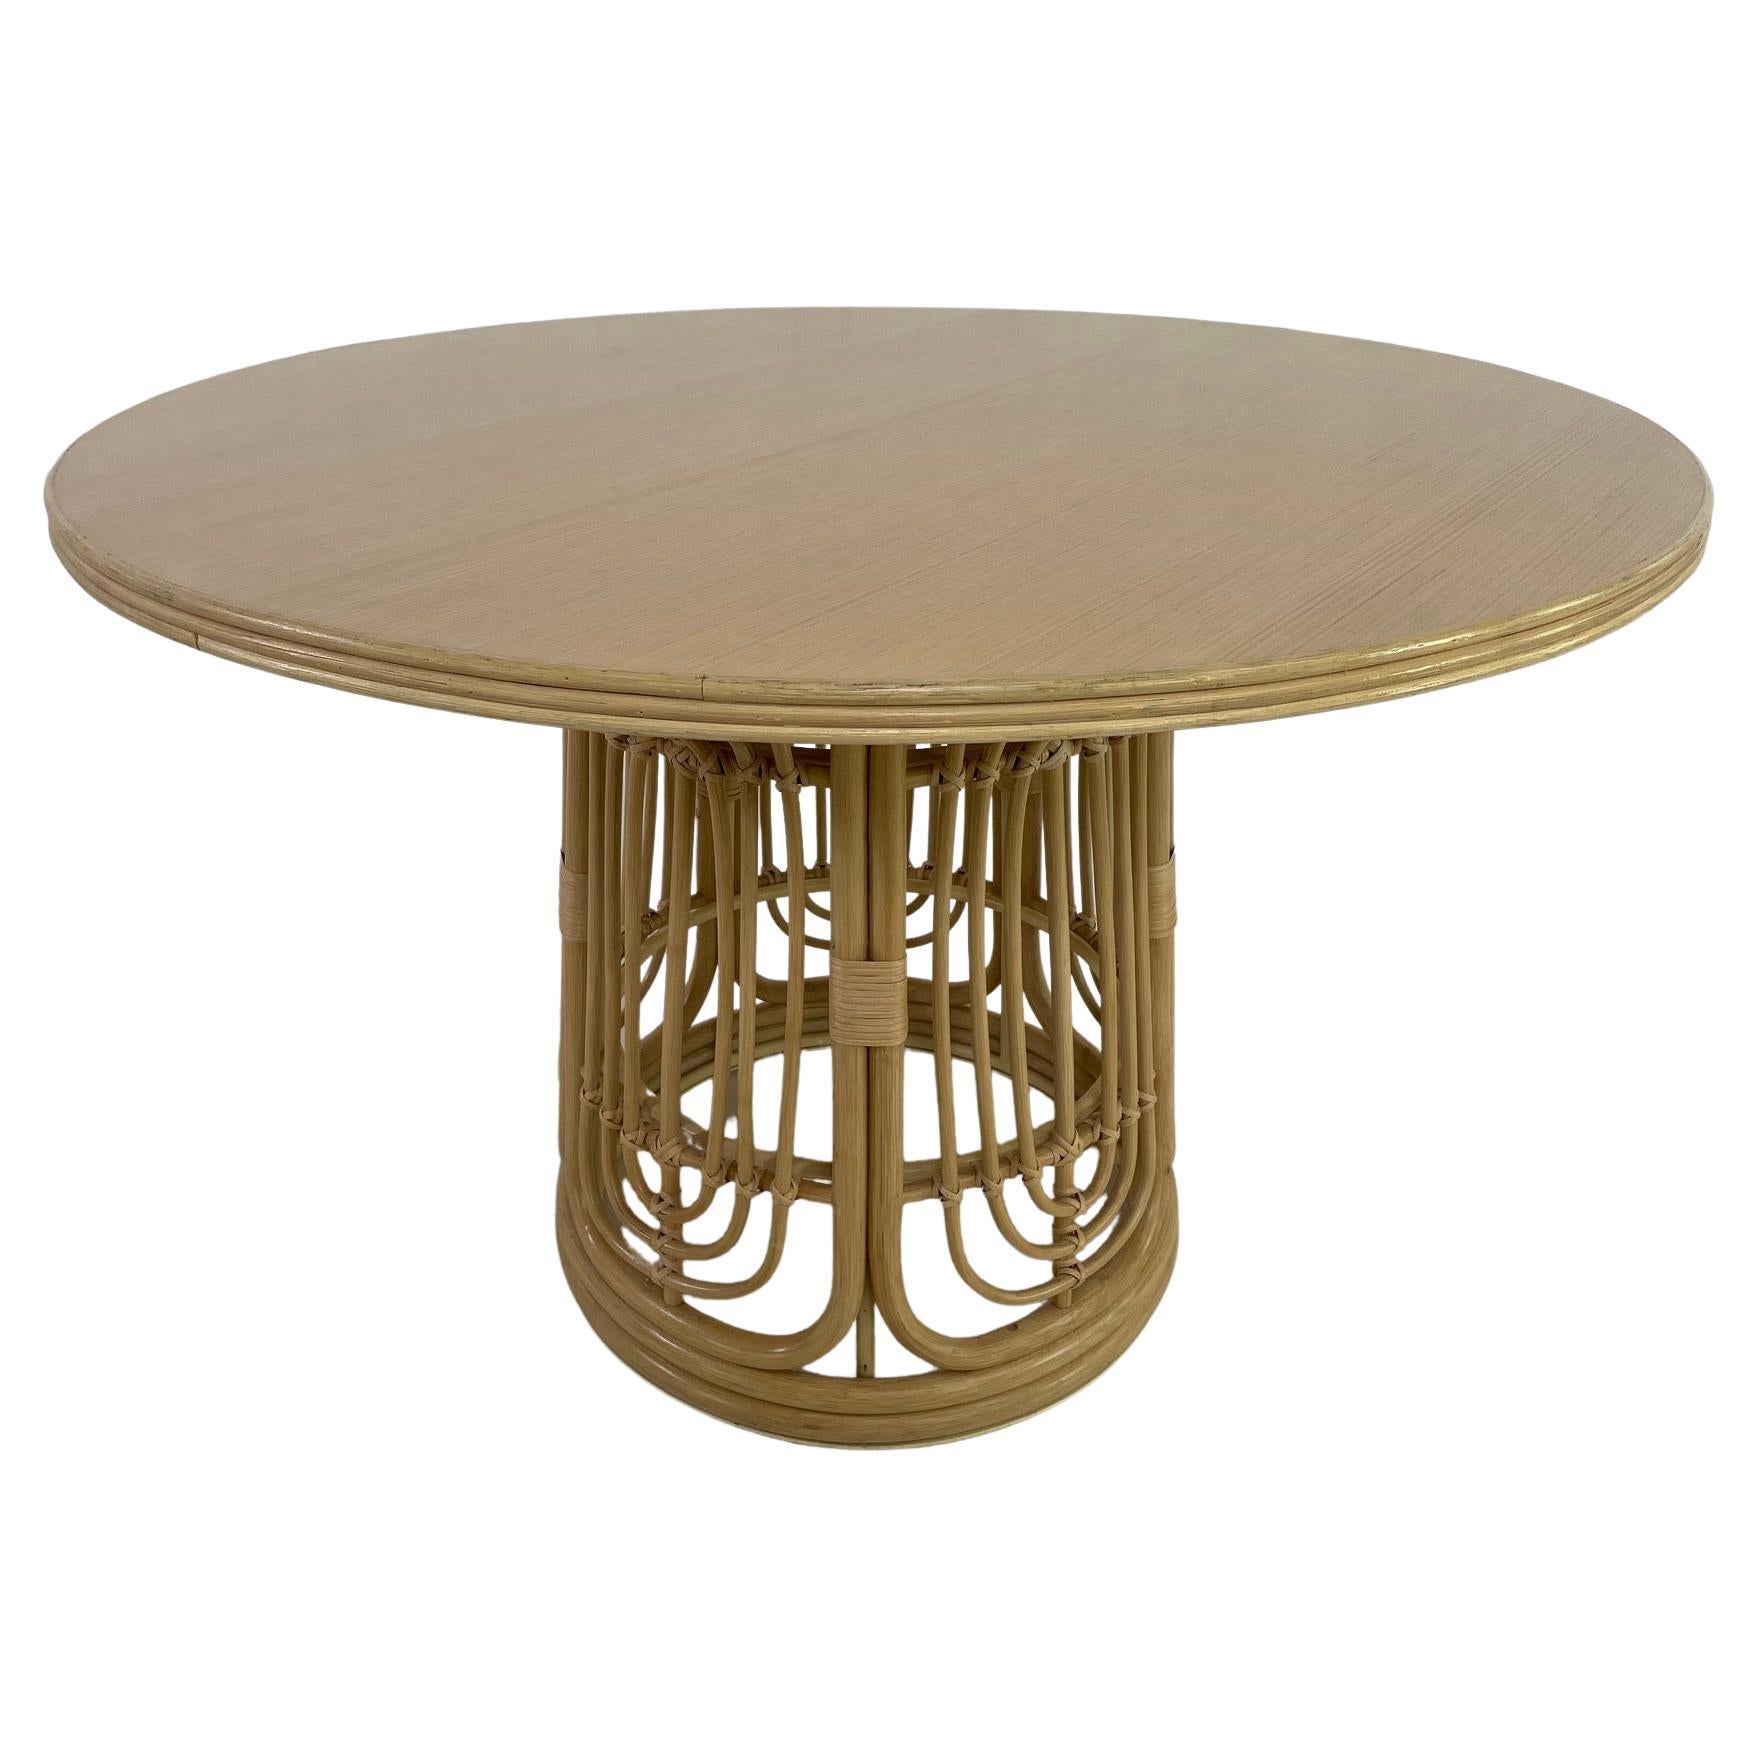 1970s Design Style Round Rattan Base Wooden Tray Dining Pedestal Fluted Table For Sale